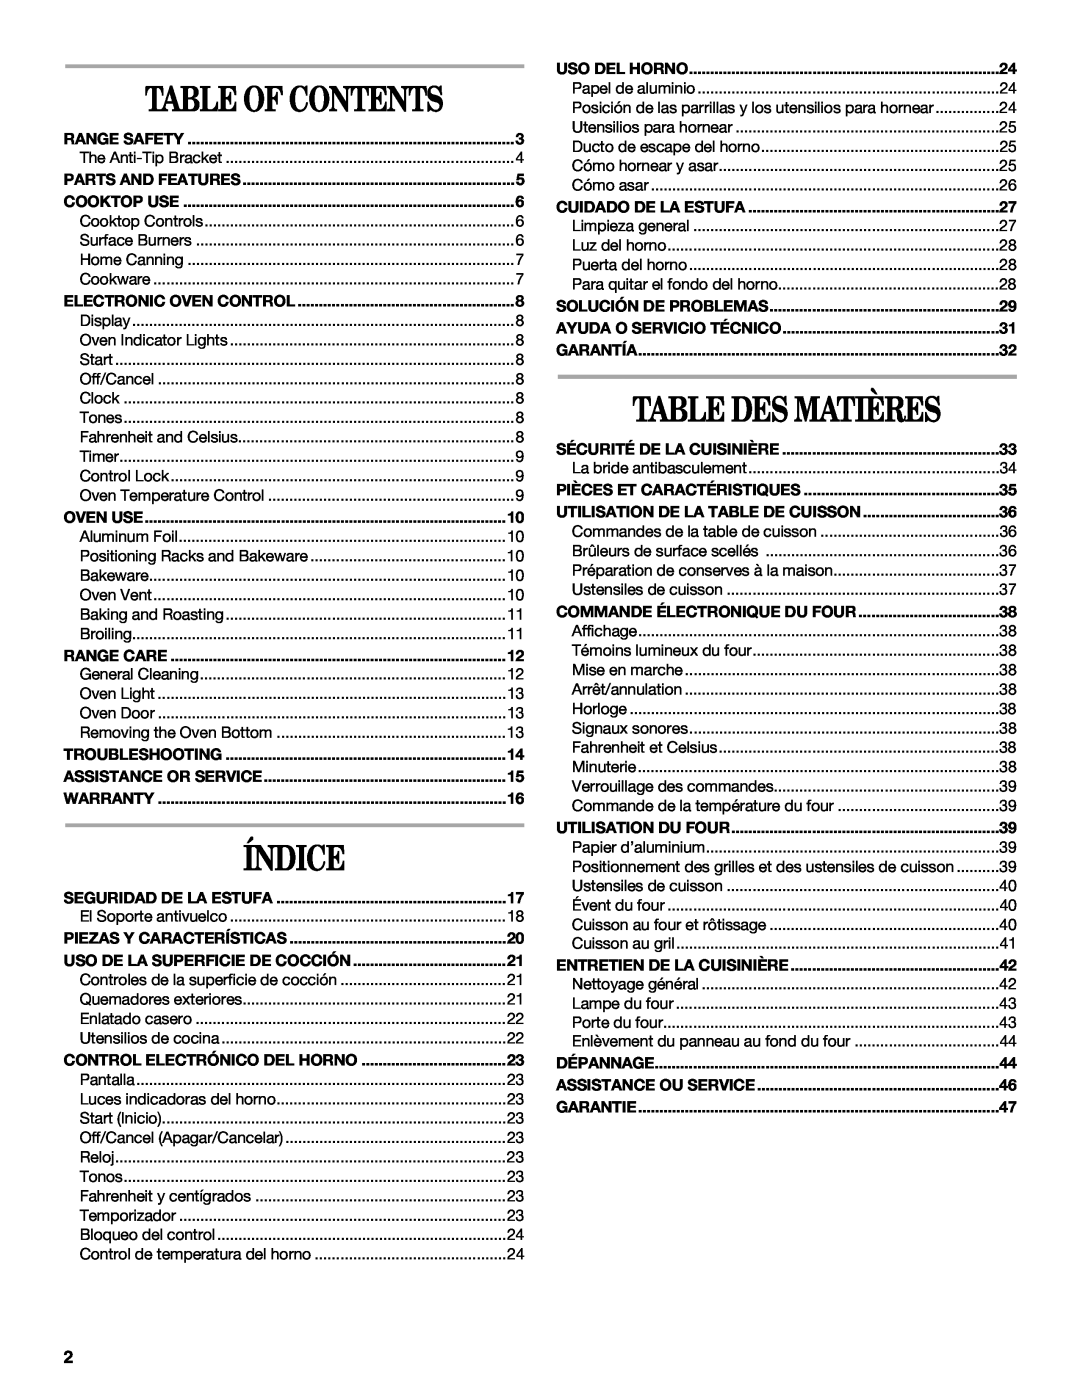 Whirlpool W10099470 manual Índice, Table Des Matières, Table Of Contents 